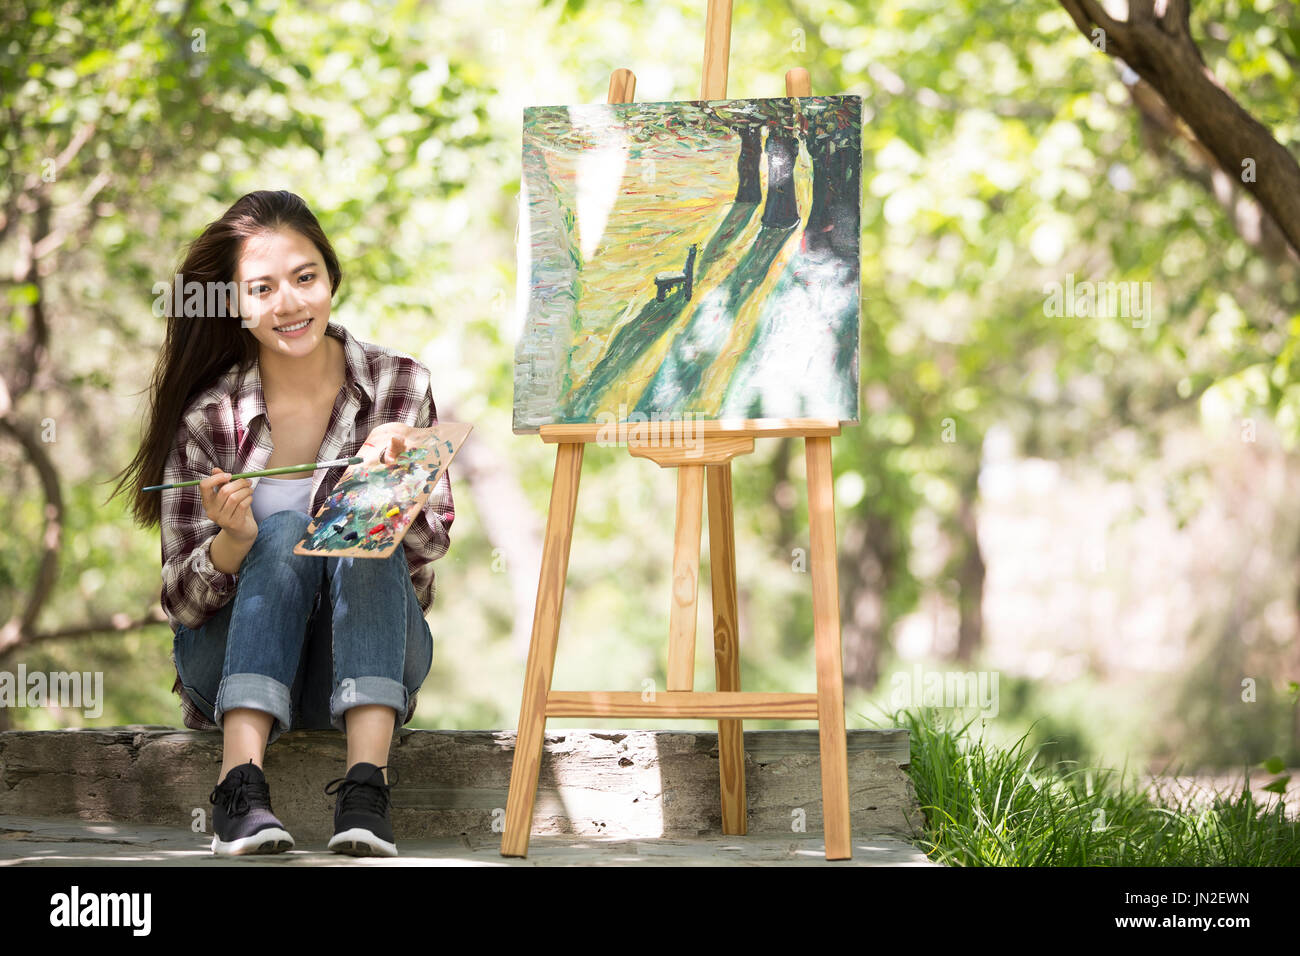 Young woman painting outdoors Stock Photo